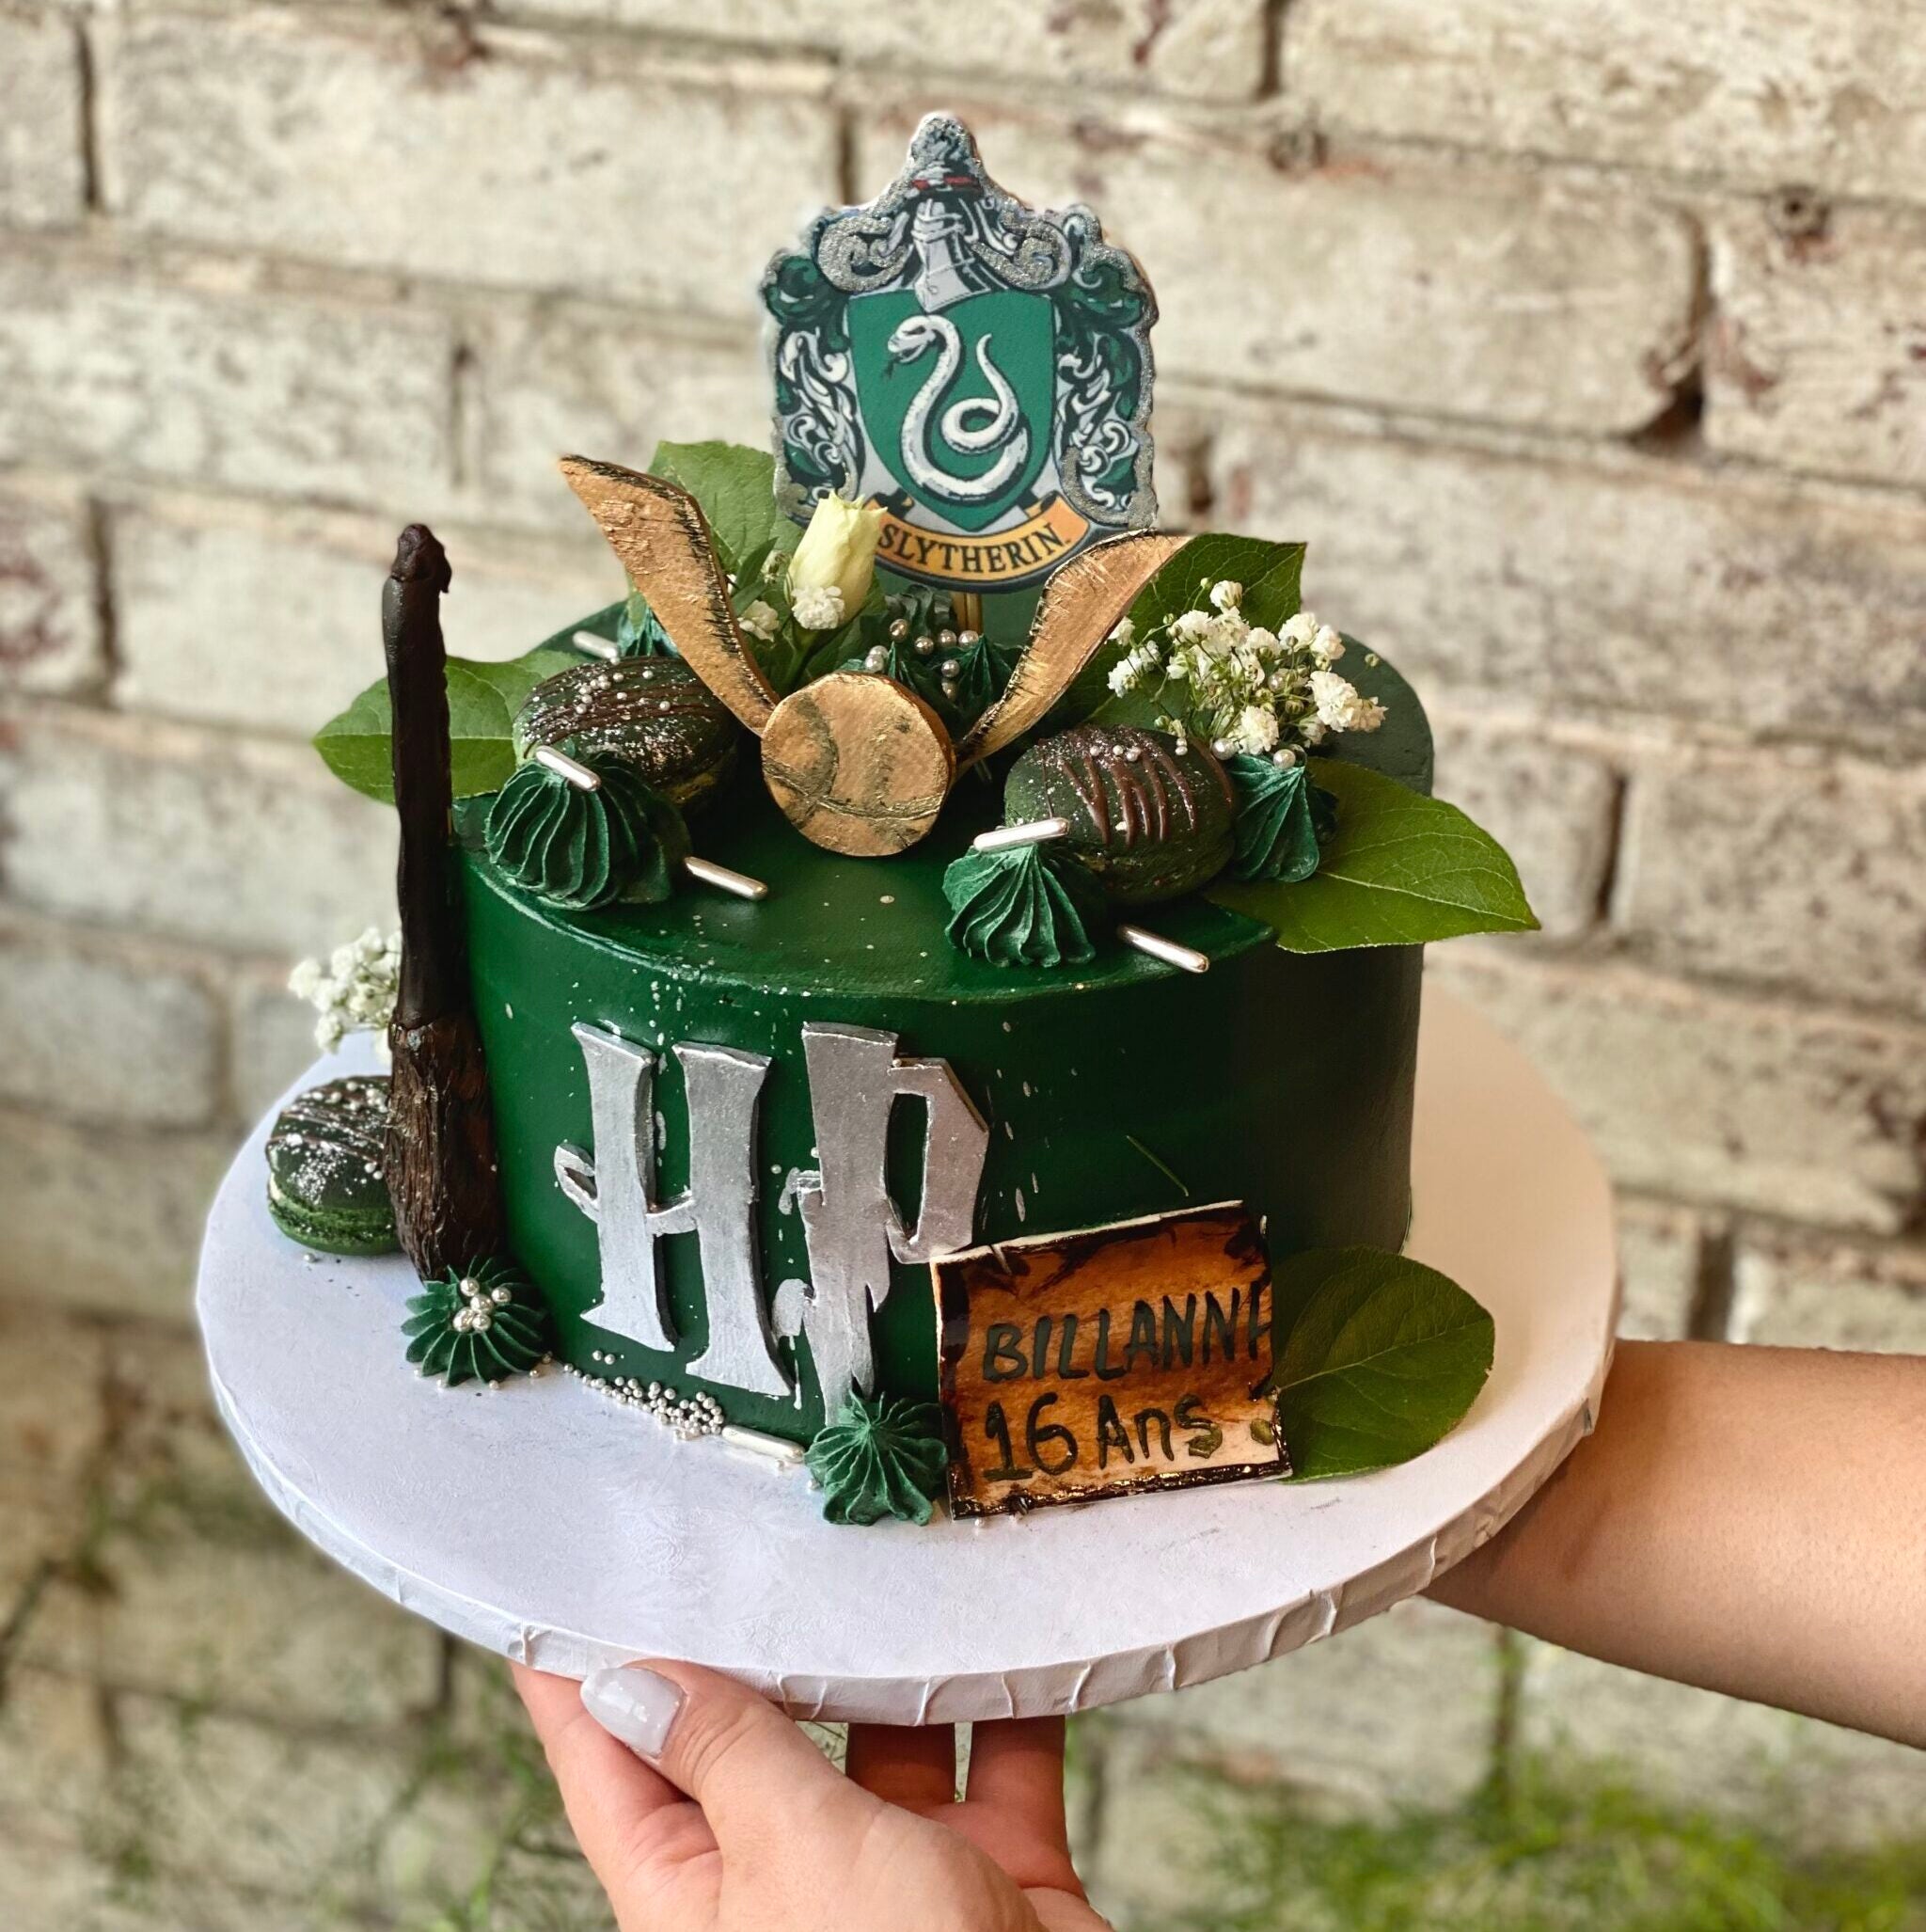 Harry Potter Cakes - Harry Potter Theme Cakes Delivery in Delhi NCR